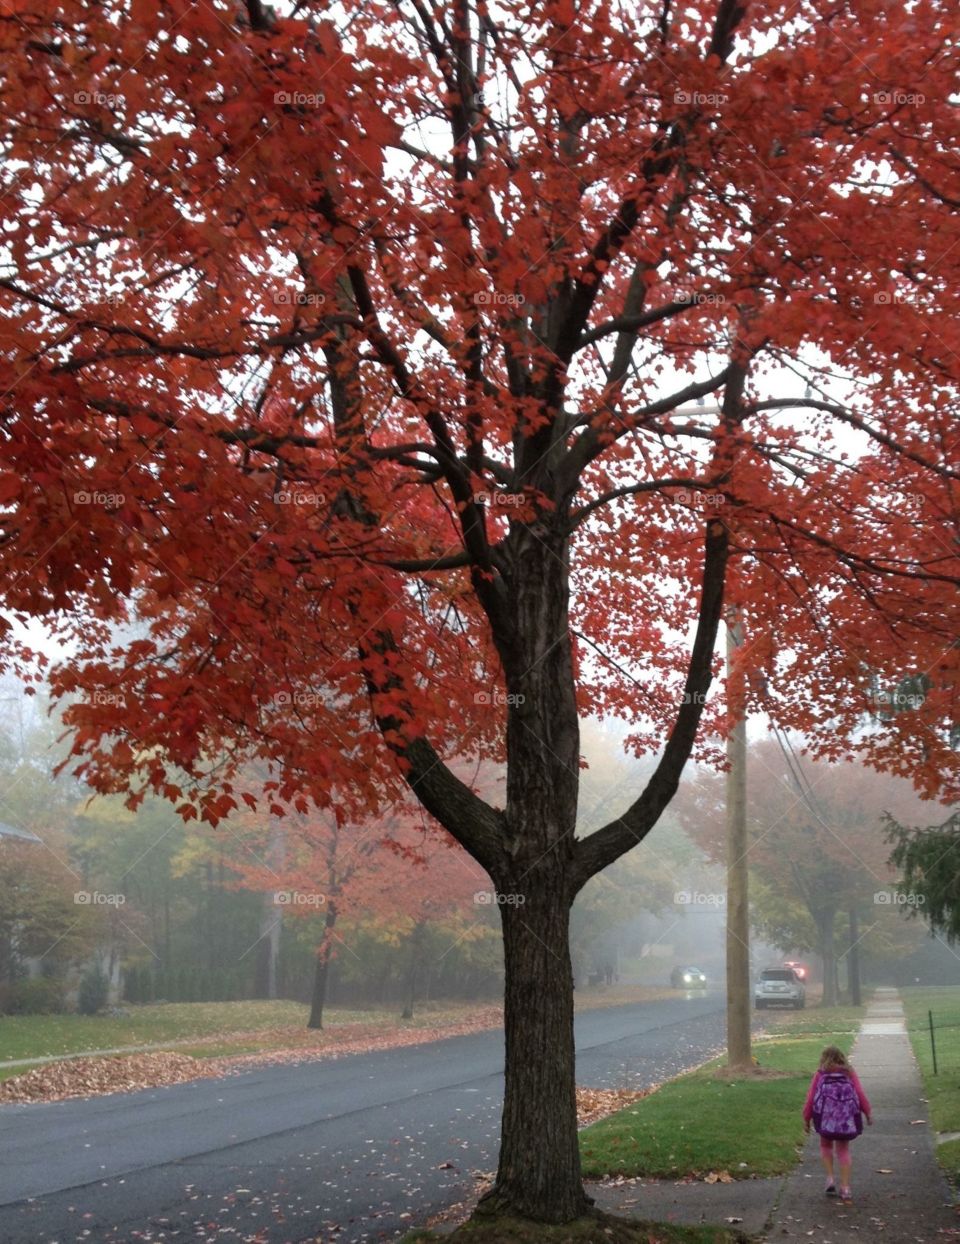 A tree in front of my house with a young girl walking by.